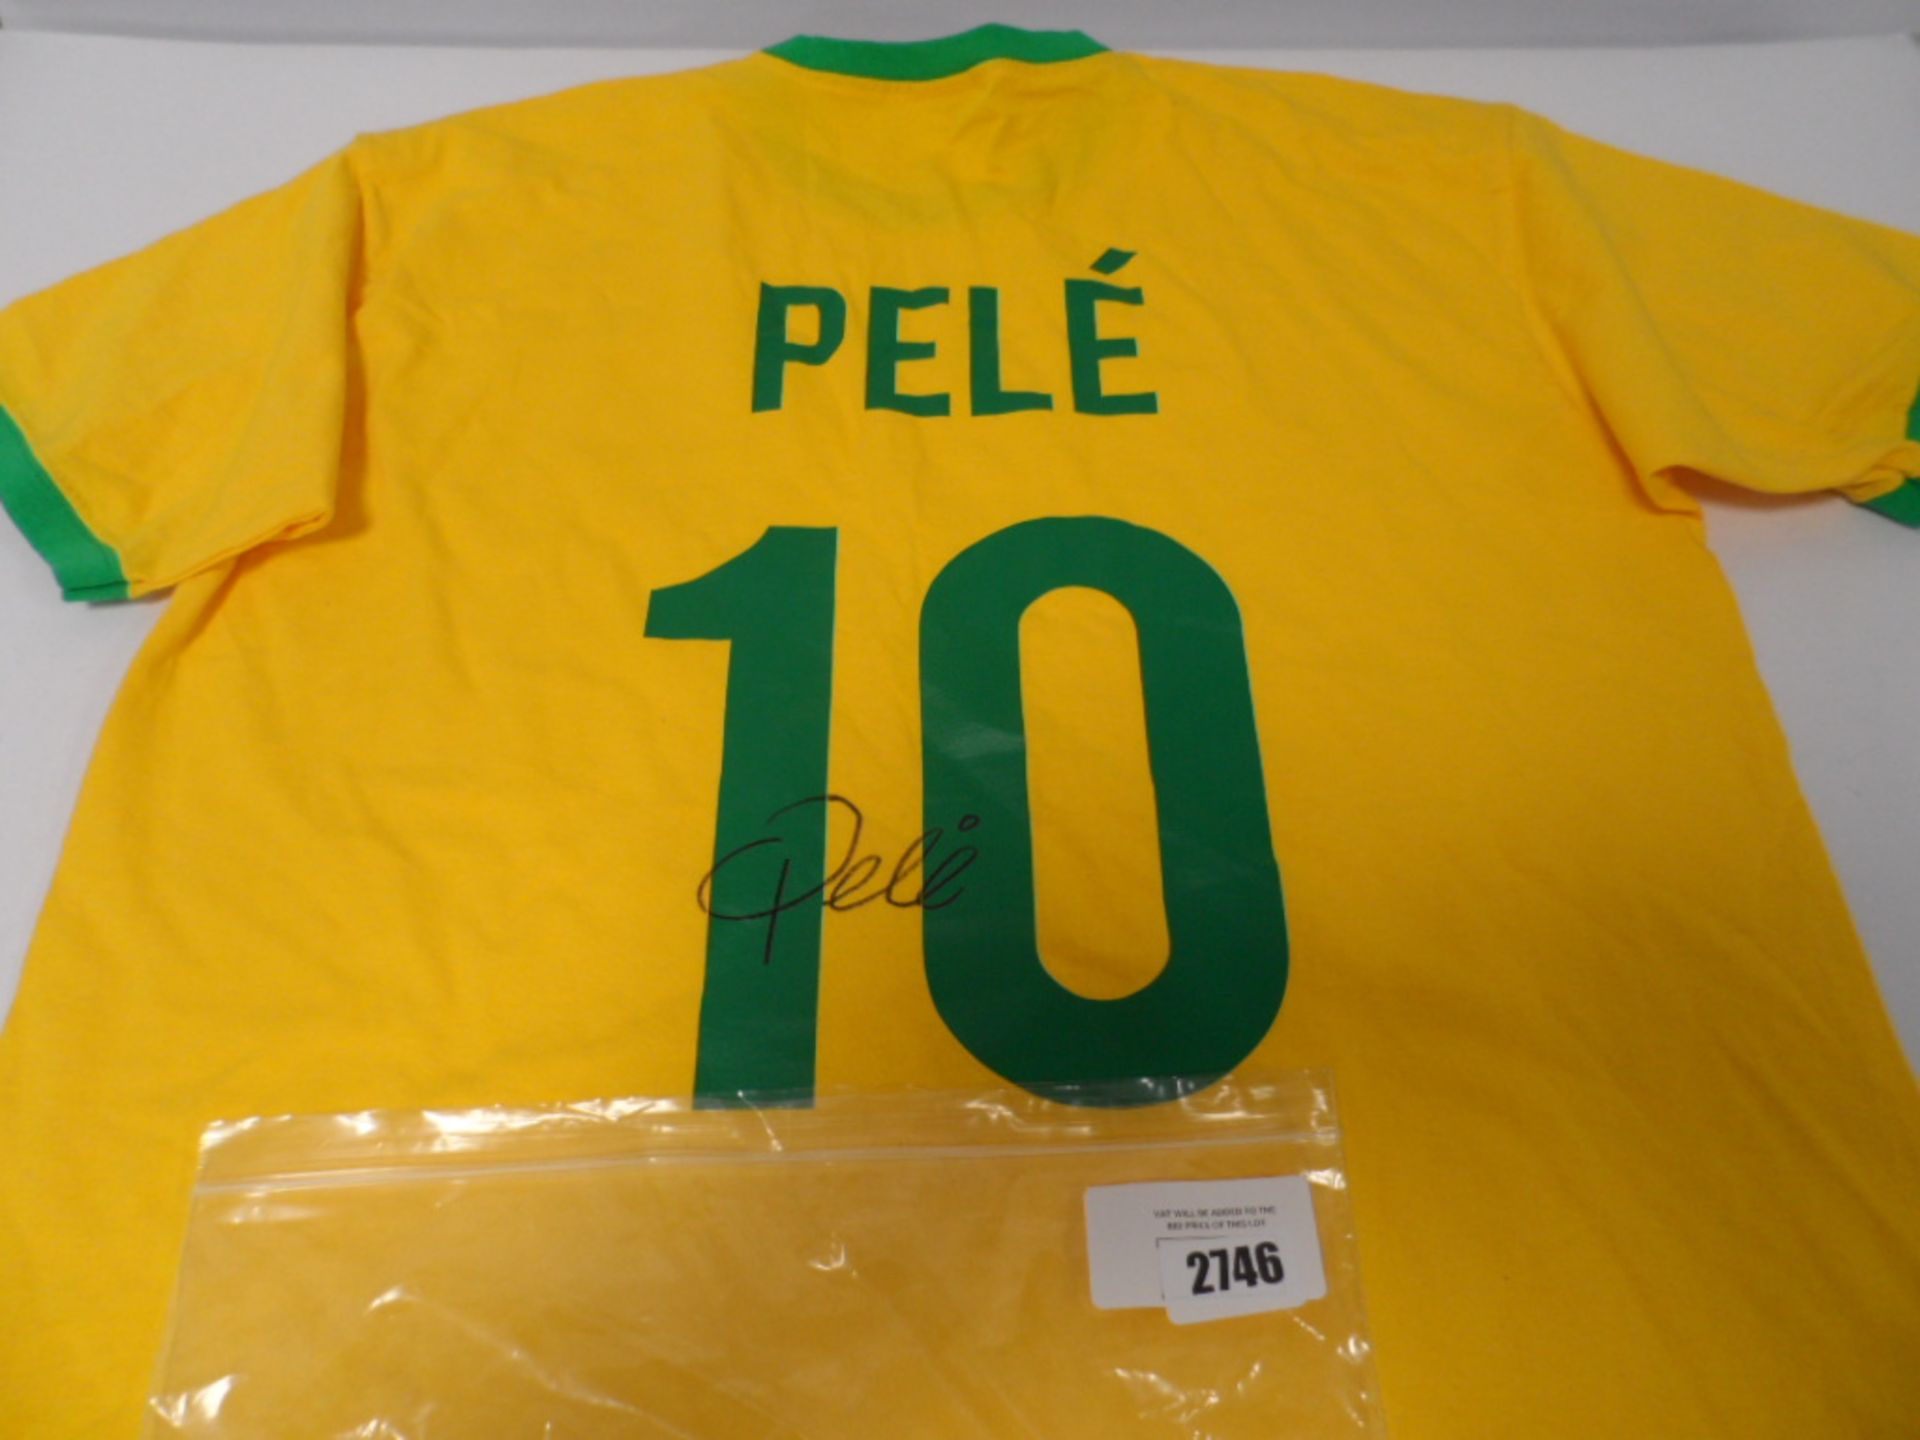 Unofficial Brazil FC shirt Number 10 Pele with signature ( unverified)